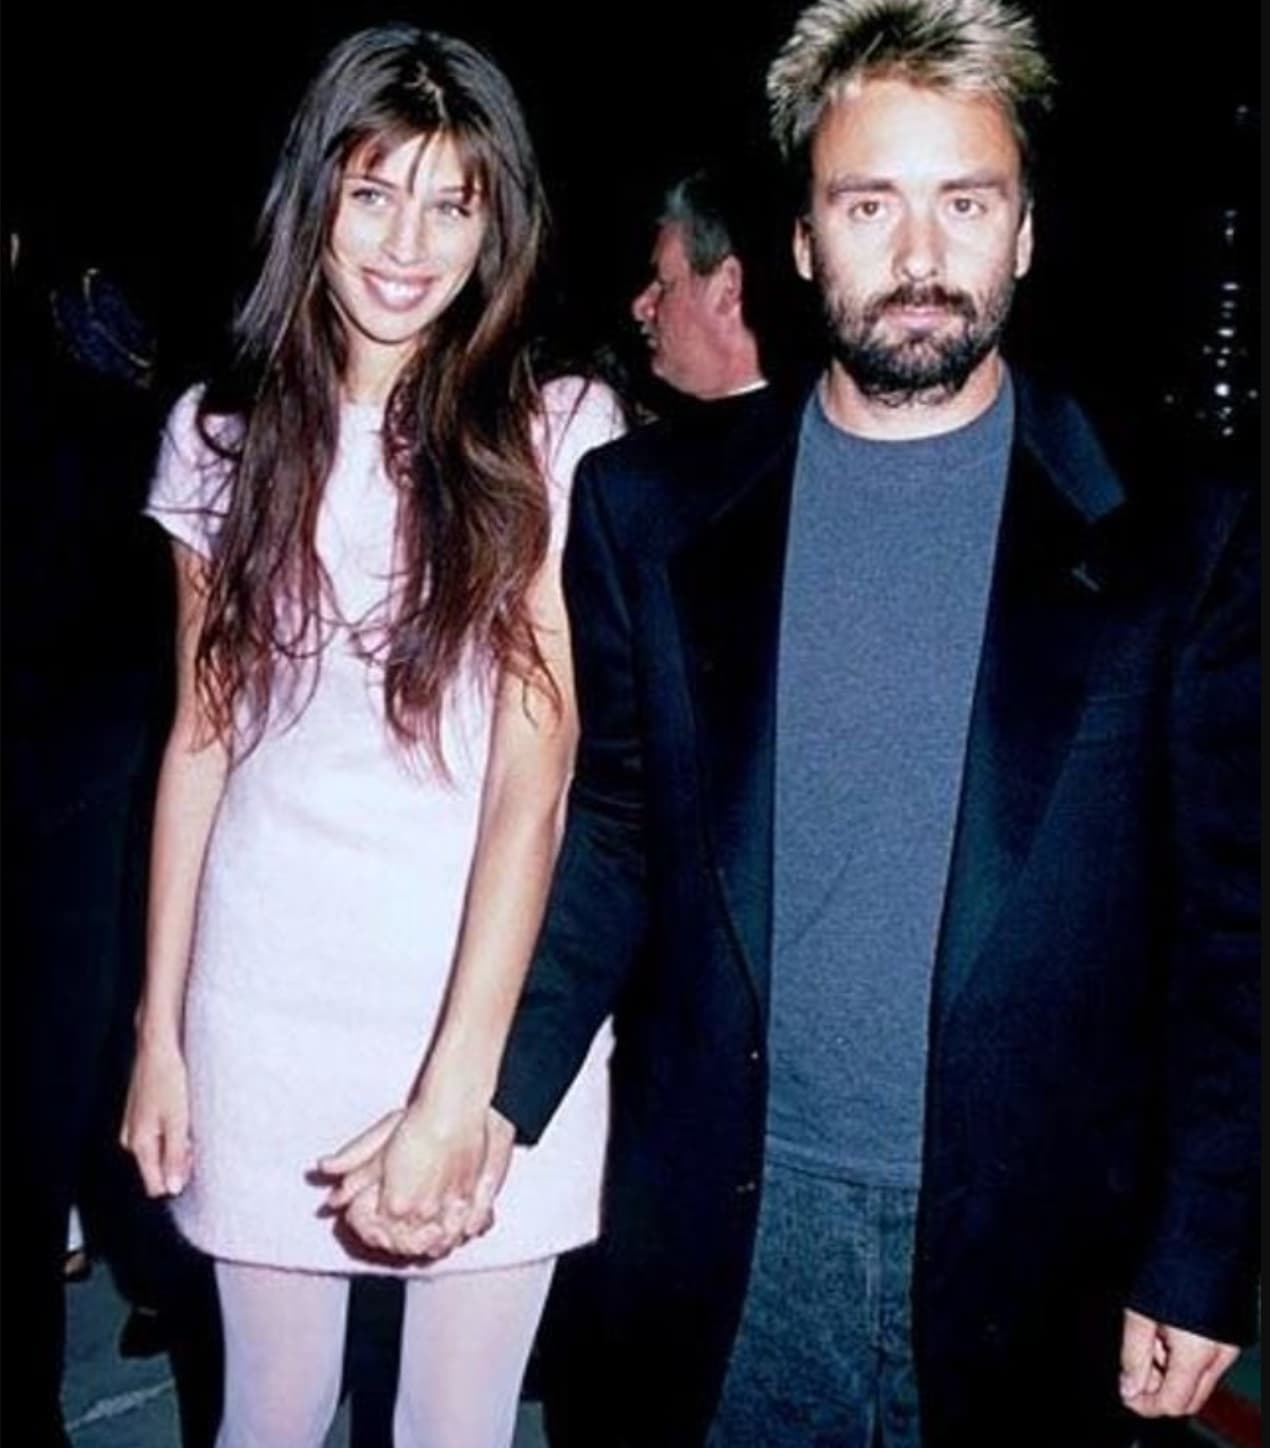 “Director of such films as La Femme Nikita and Taken, Luc Besson was 32 when he began a relationship with 15-year-old actress Maïwenn Besco in 1991, who gave birth to the couple’s daughter the following year at age 16. Besson, by the way, has never been charged with statutory r—e in his native home of France, because the age of consent is 15.”